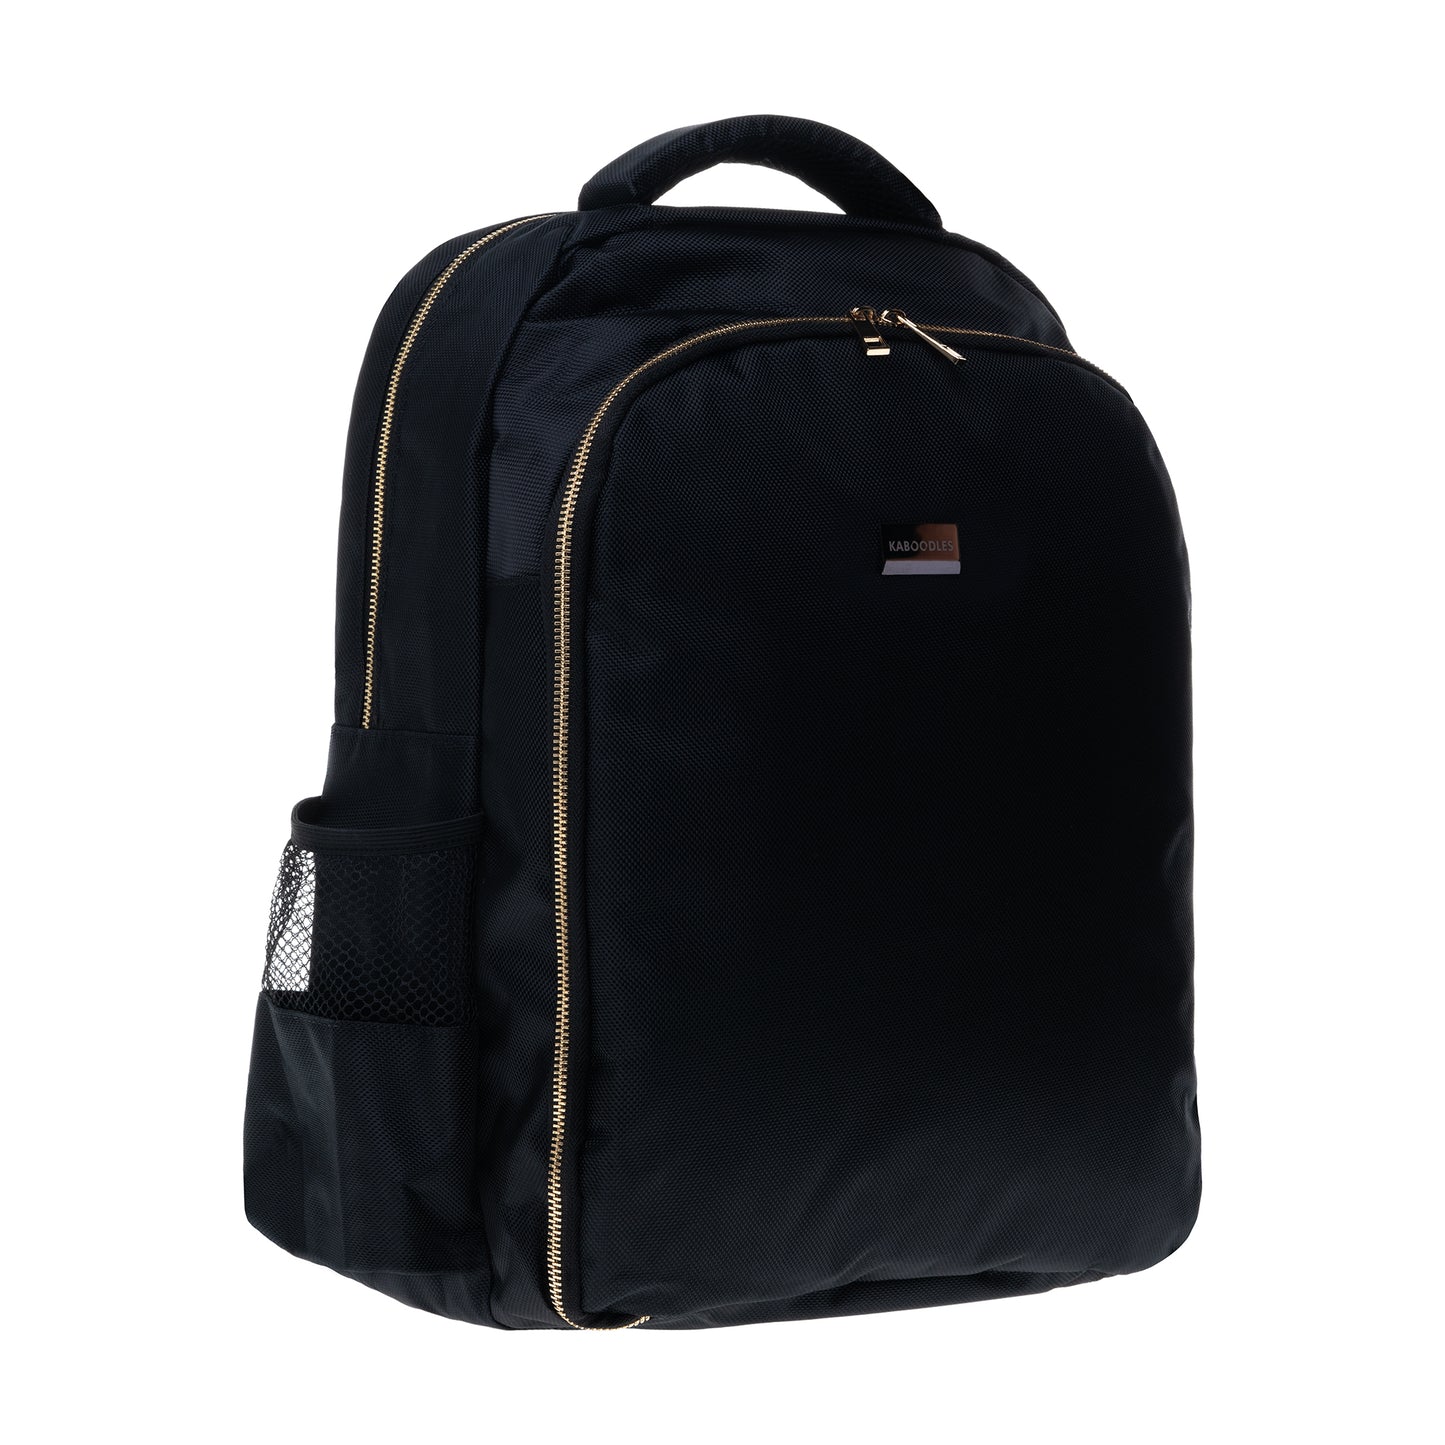 The Academy Backpack